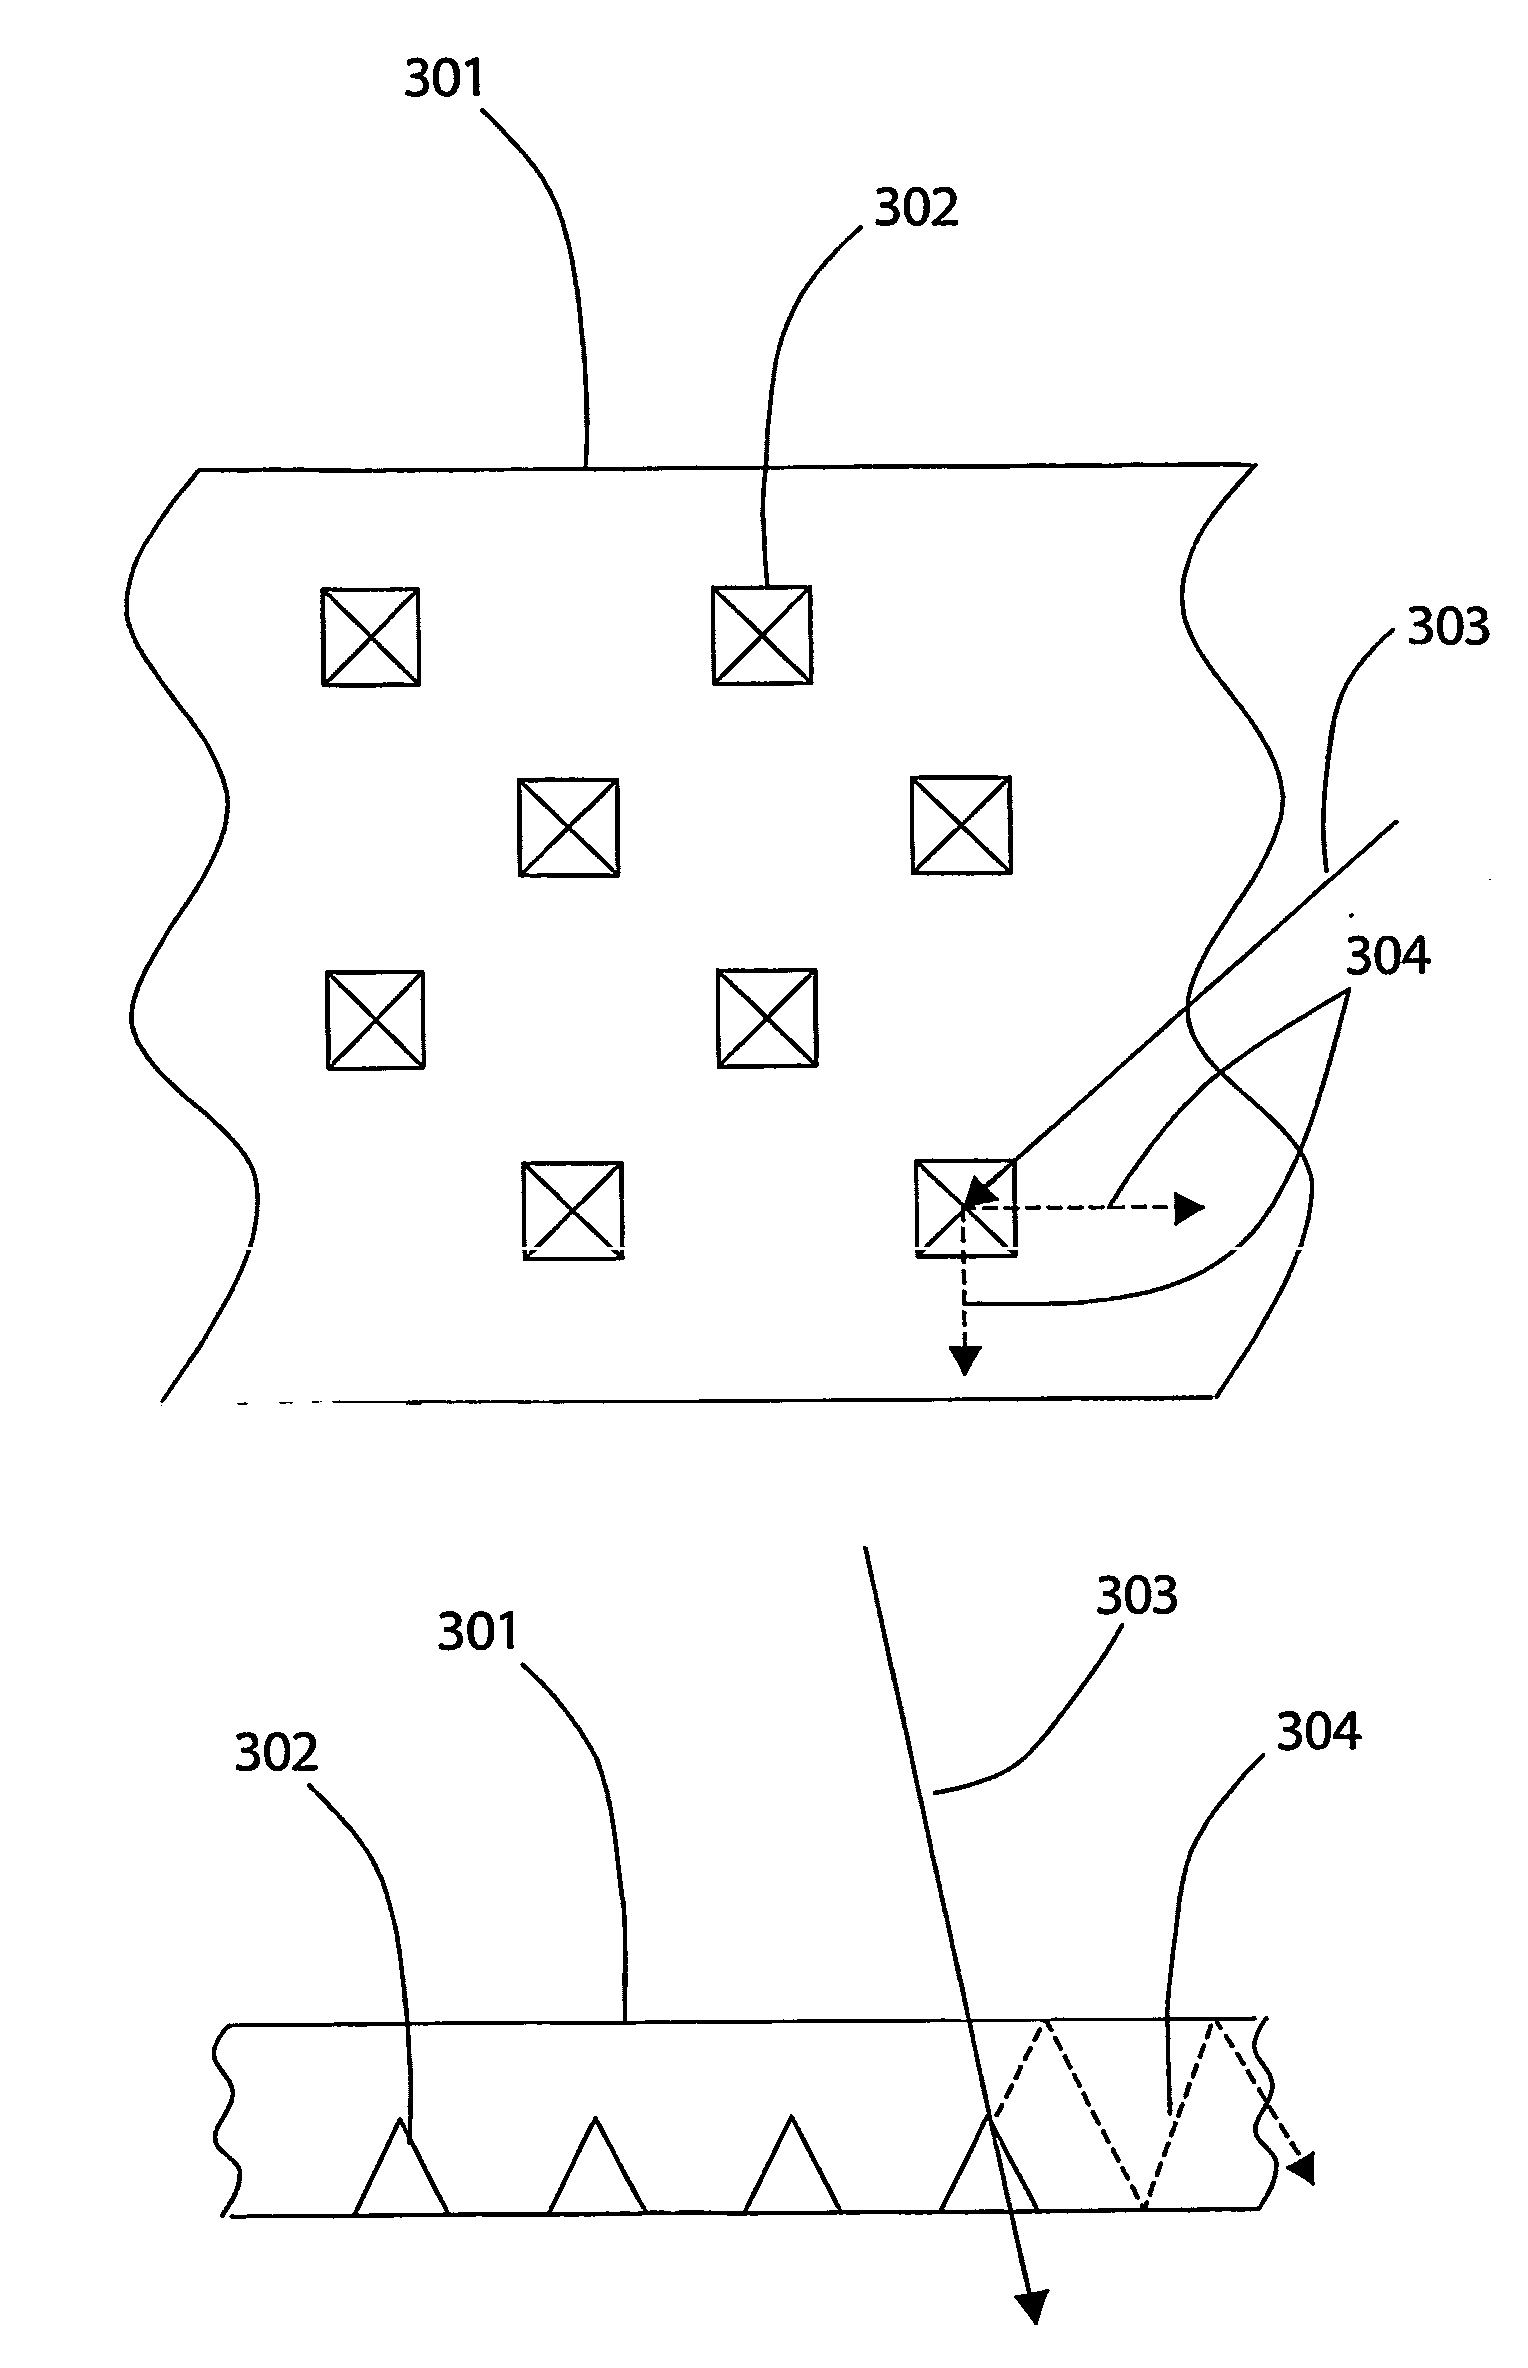 Coordinate detection system for a display monitor